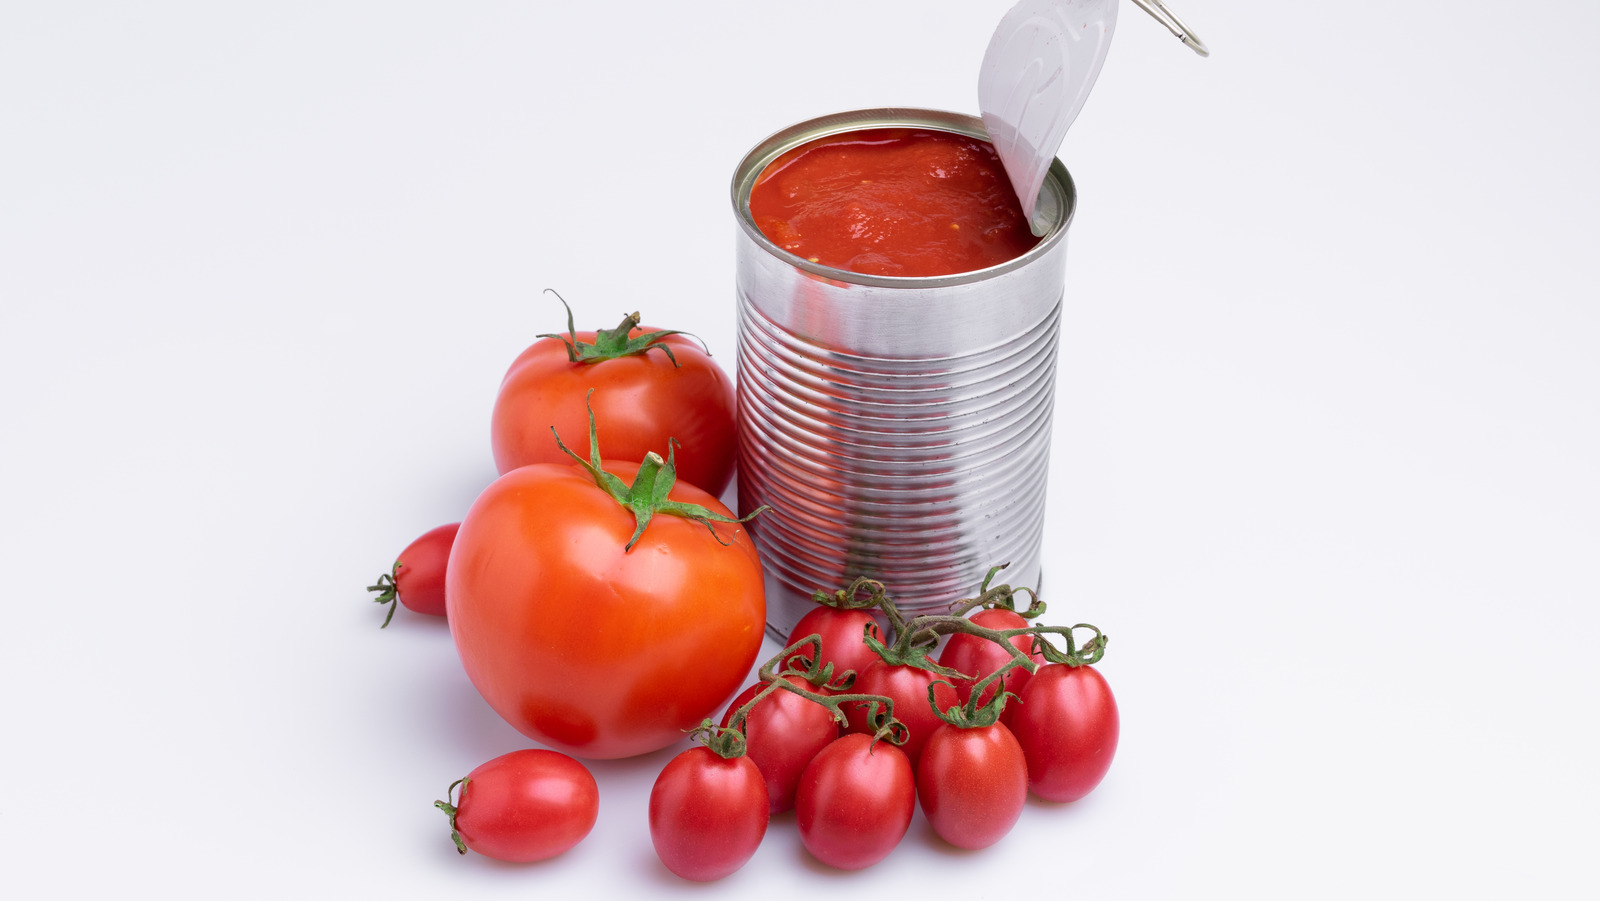 https://www.mashed.com/img/gallery/canned-tomato-brands-ranked-worst-to-best/l-intro-1642460477.jpg